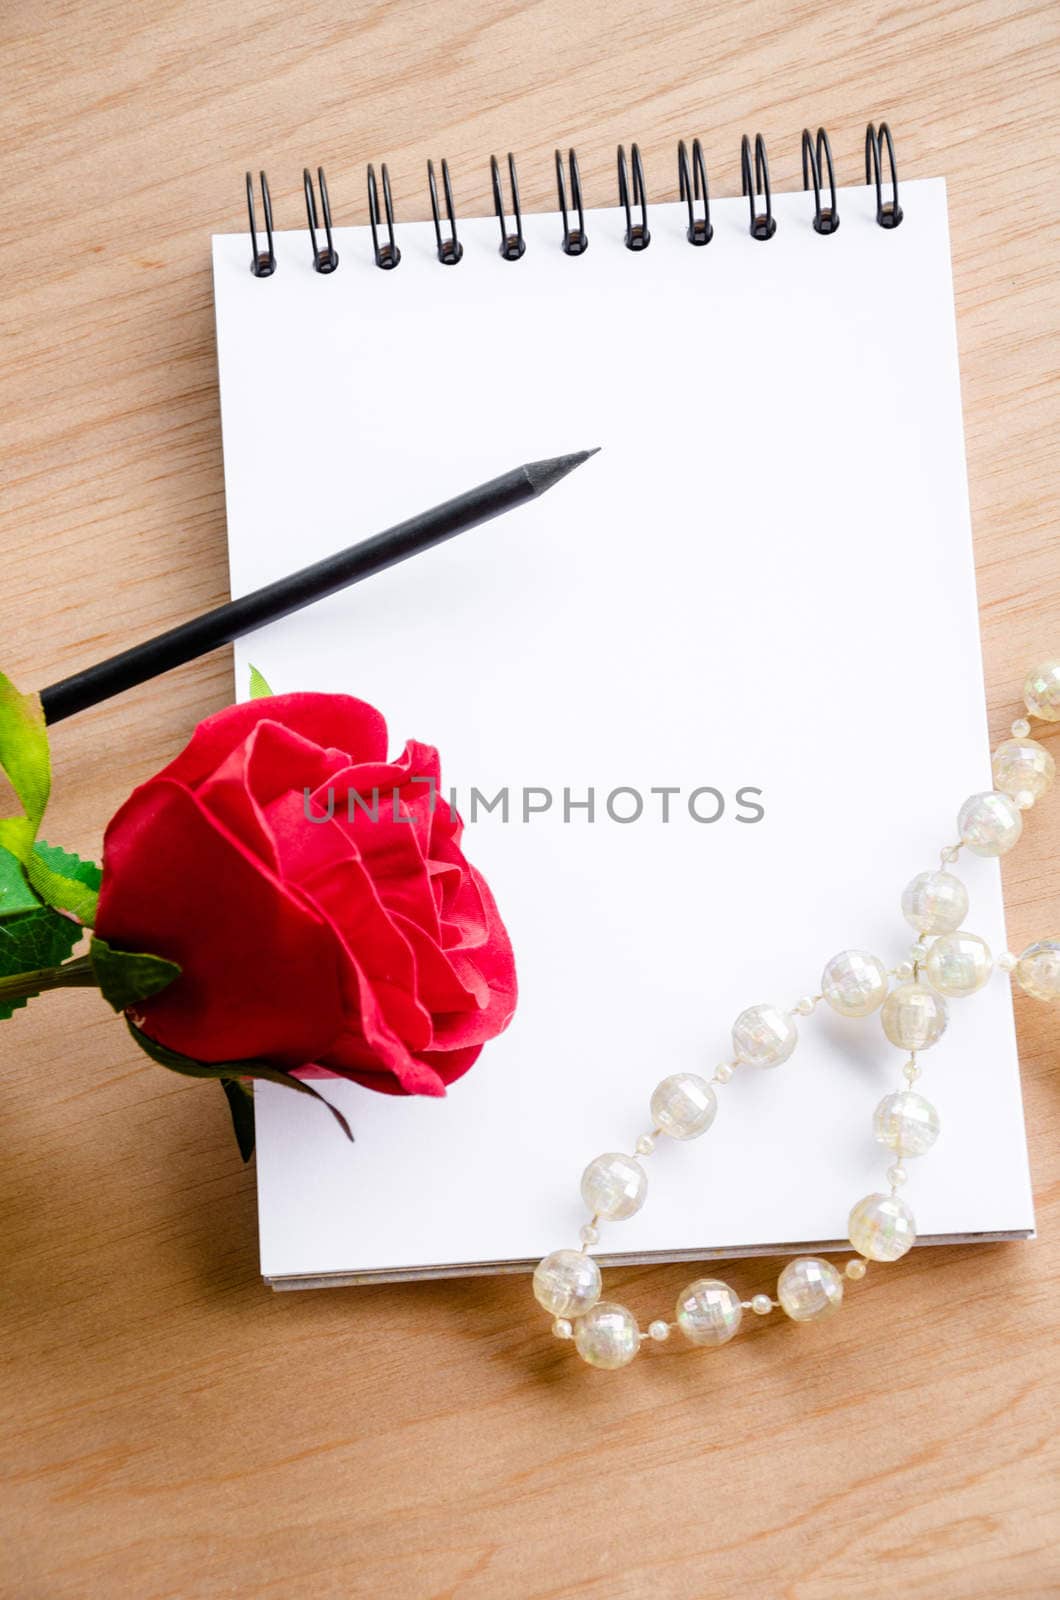 Red rose and black pencil with blank dairy on wooden background. For creative your message text here.